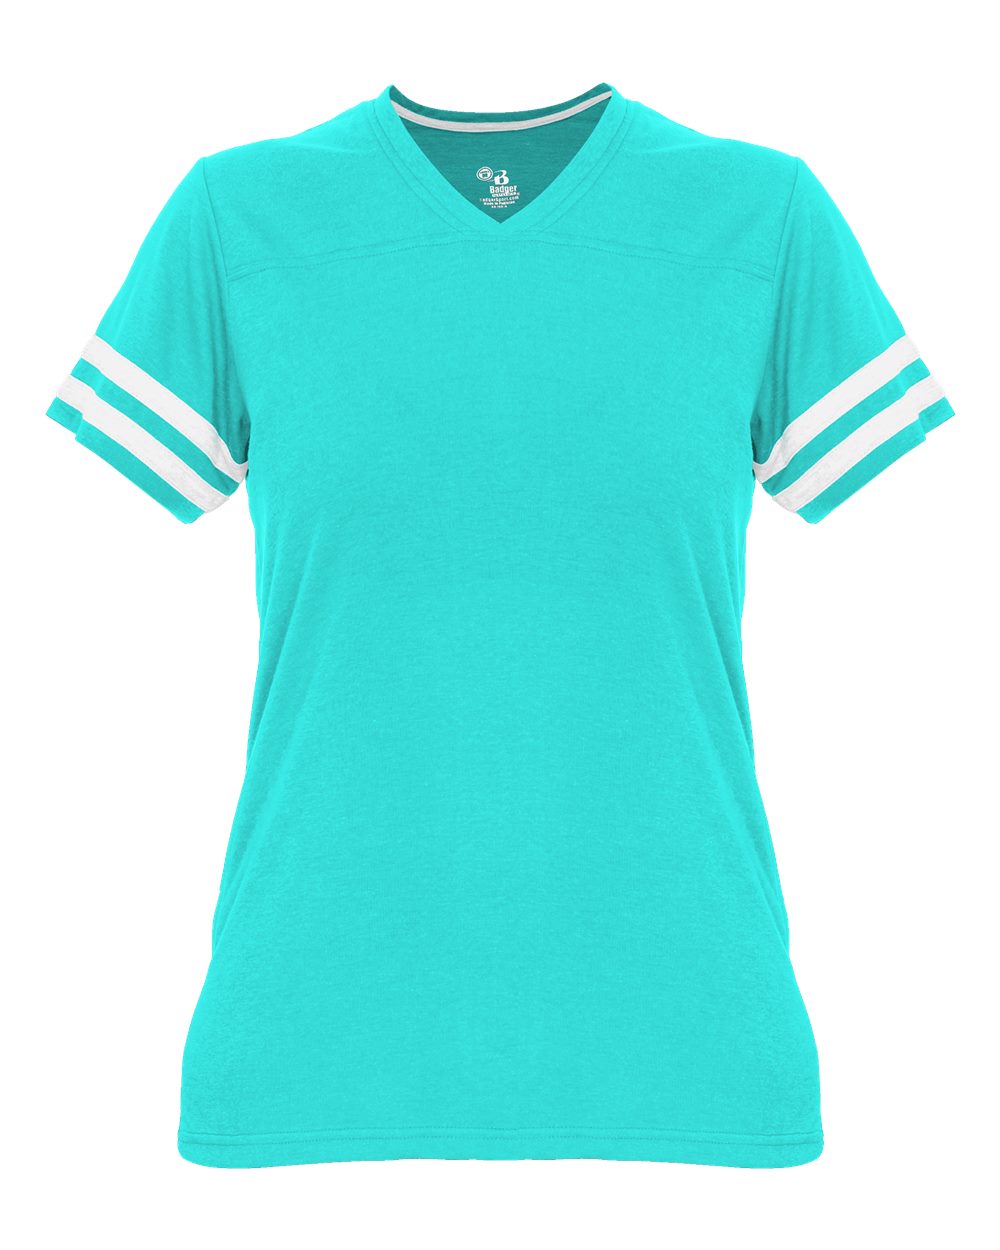 click to view Turquoise/ White